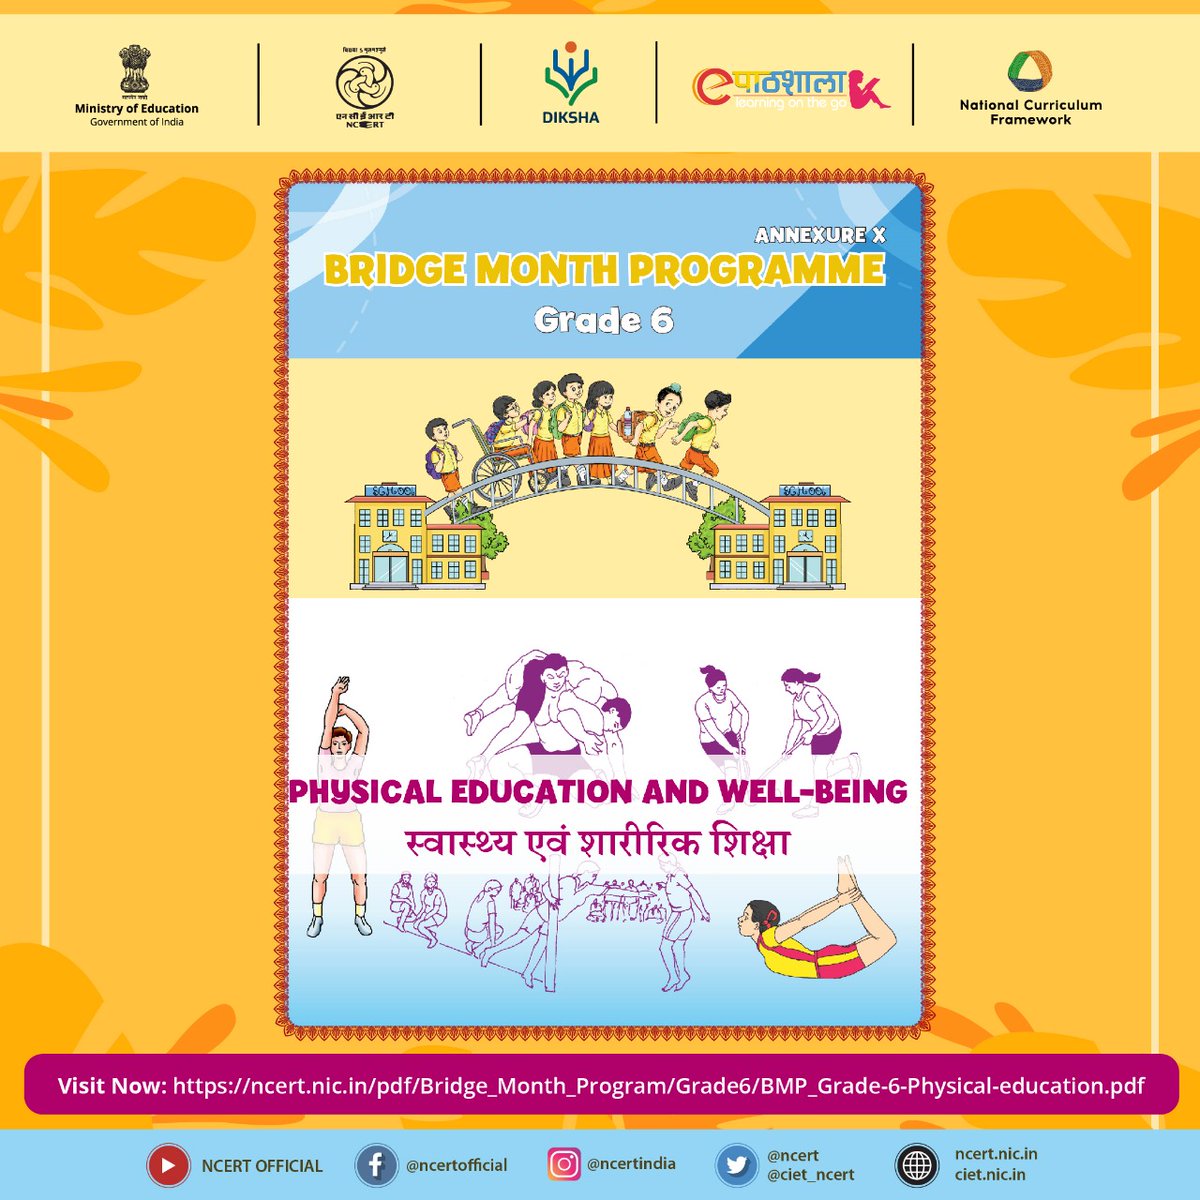 Get ready to move and groove with NCERT's Bridge Month Course for Grade 6 Physical Education curriculum. Embrace the joy of physical activity and healthy living. Download now: ncert.nic.in/pdf/Bridge_Mon… 

#PhysicalEducation #Grade6 #NCERT #EducationForAll #TeachersEmpowerment…